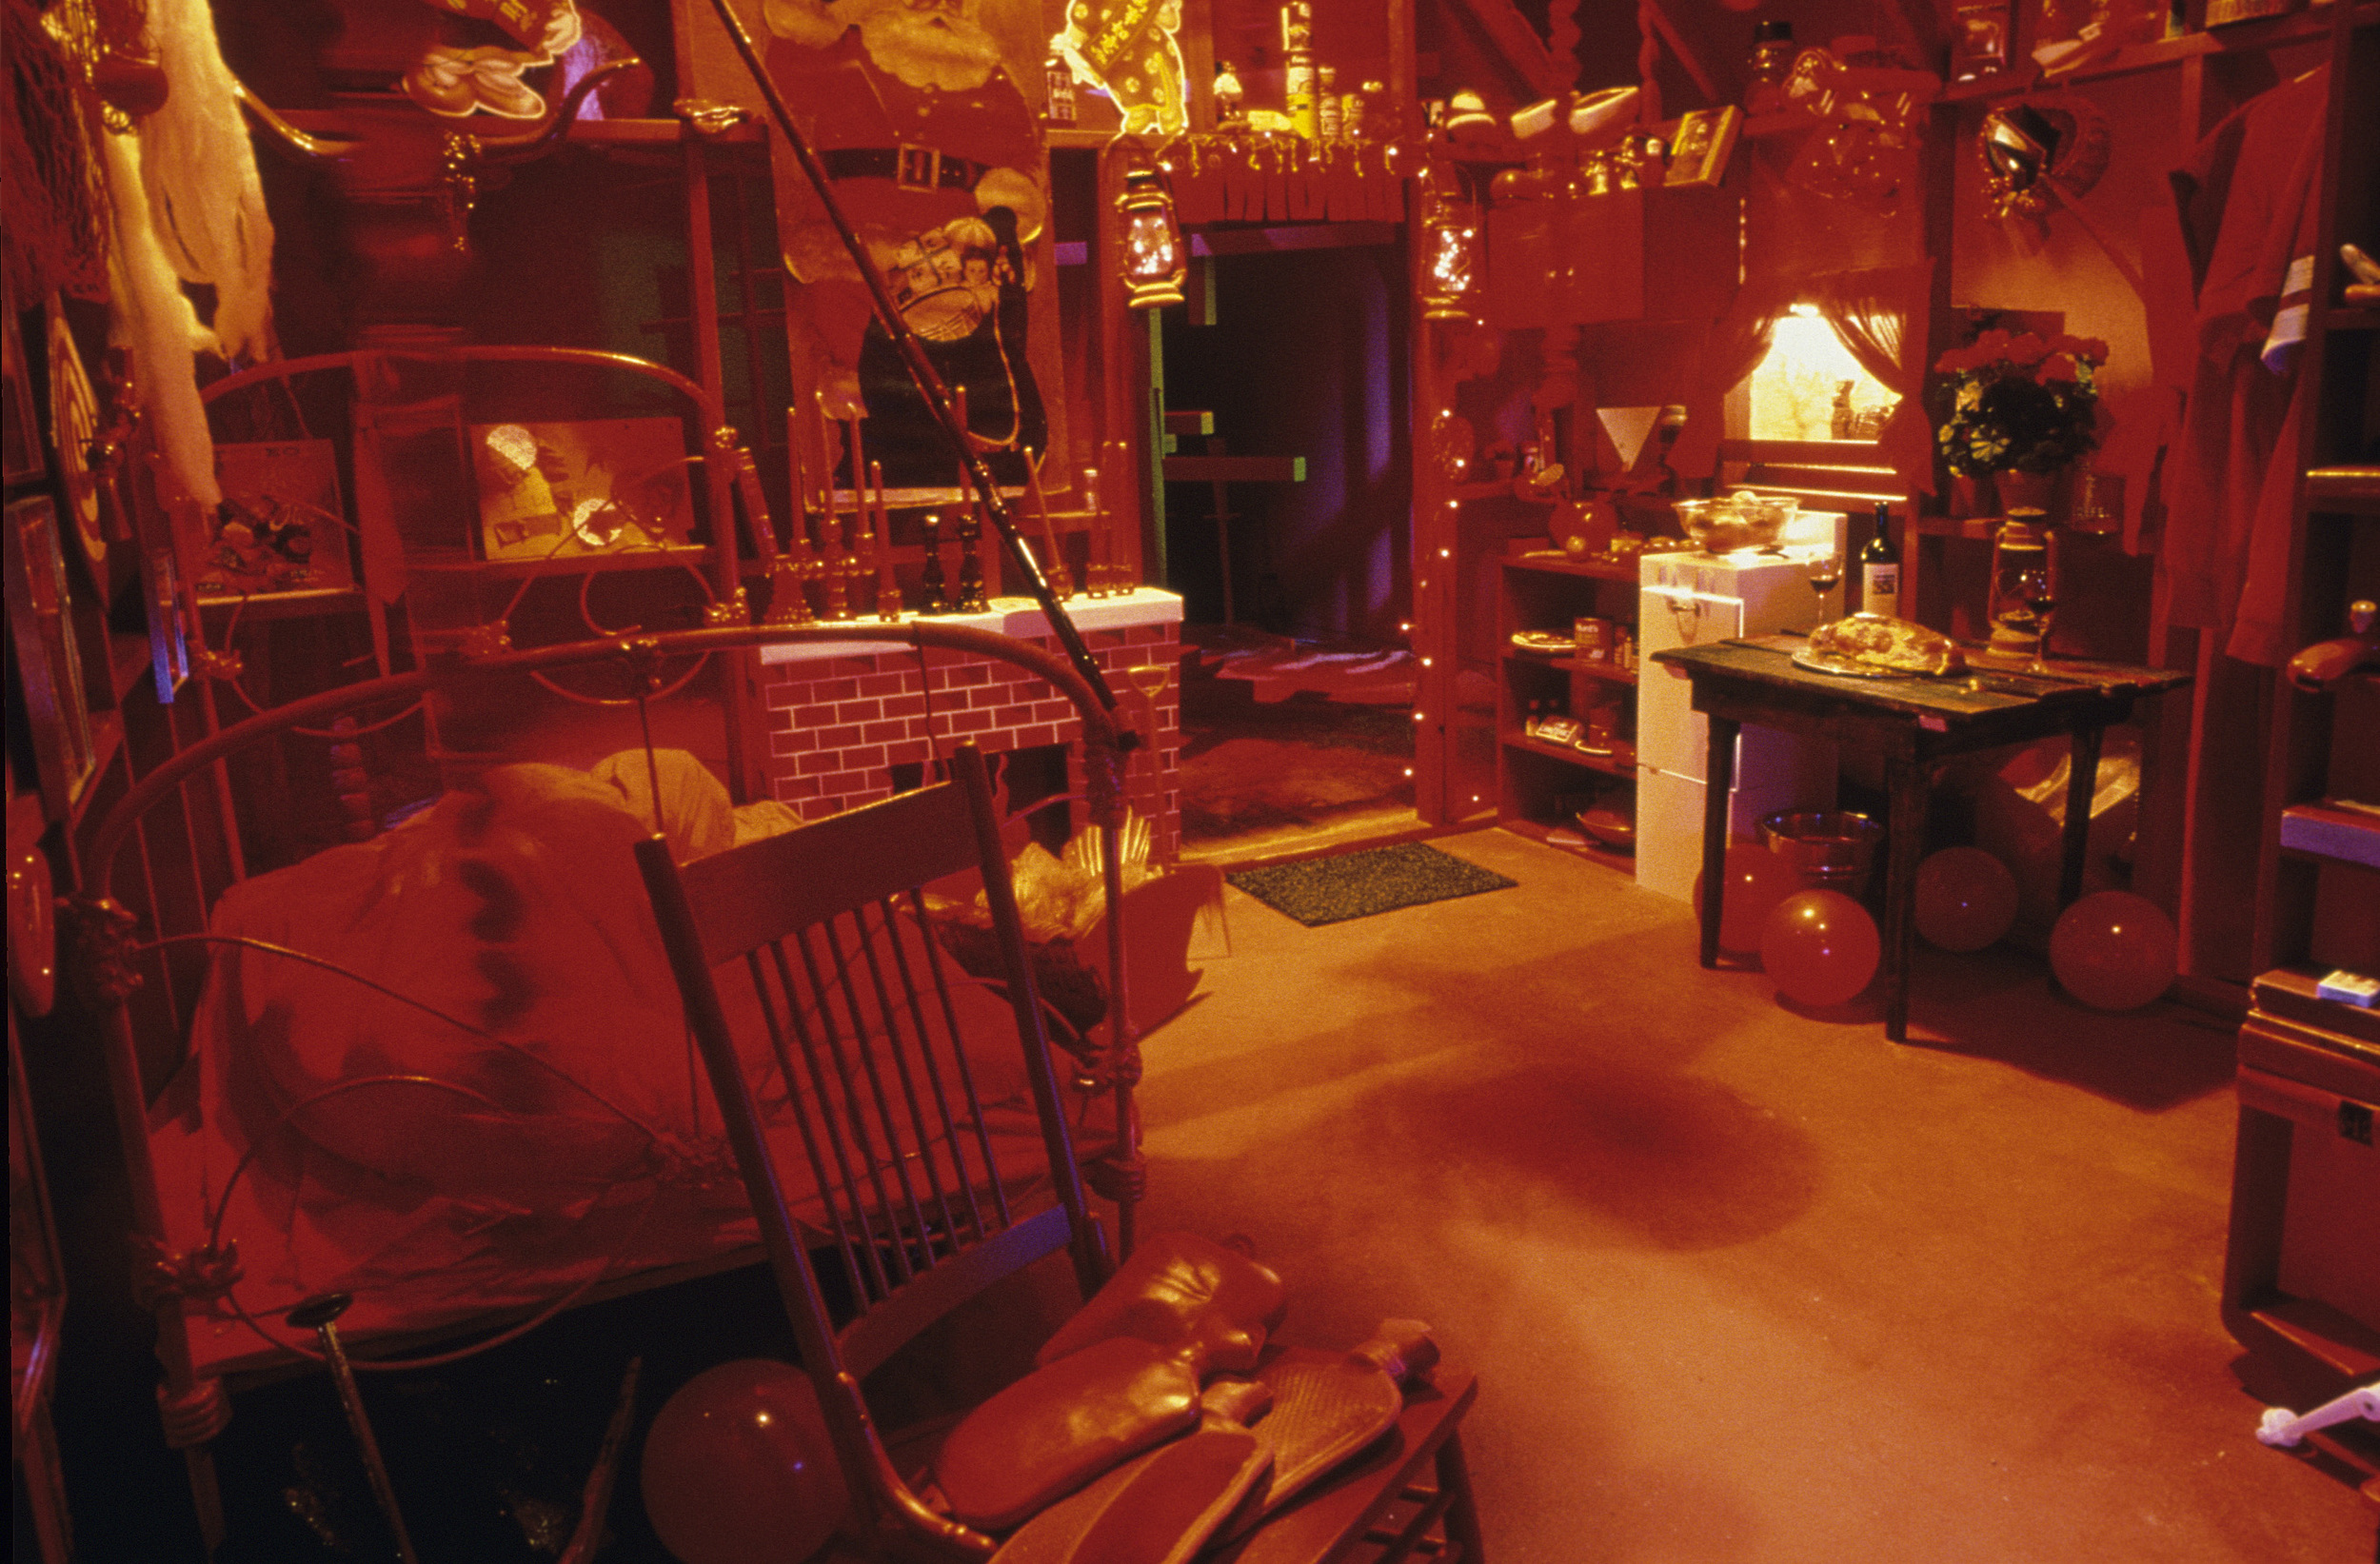  Red Room interior. There were dioramas in the cupboard, the windows, and the oven.   